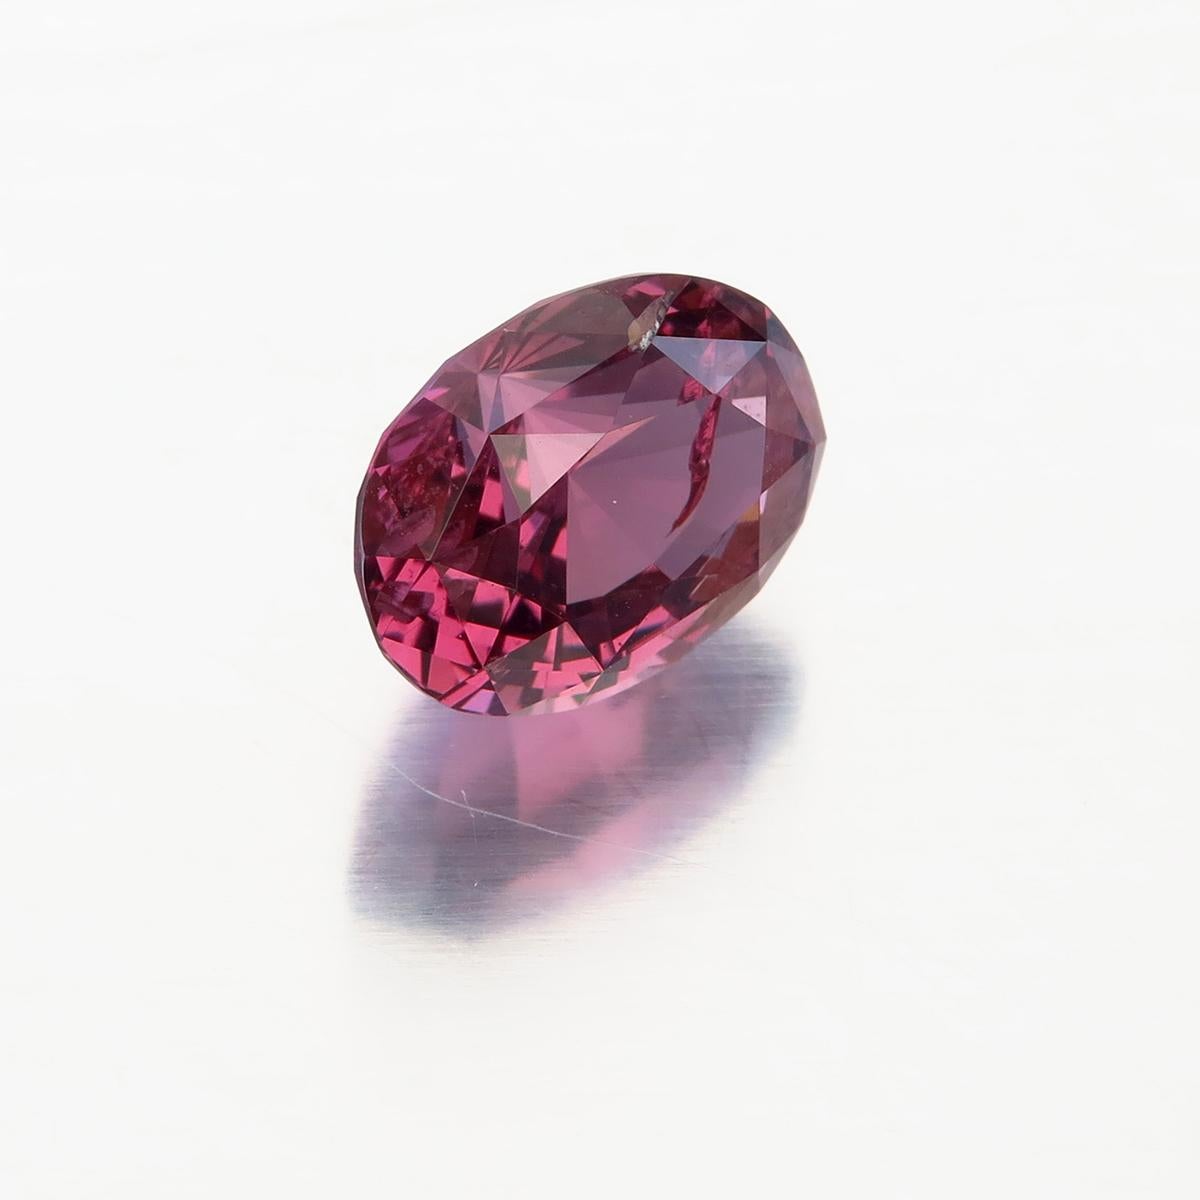 Antique Cushion Cut 1.87 Carat Pink Spinel Lotus Certified For Sale